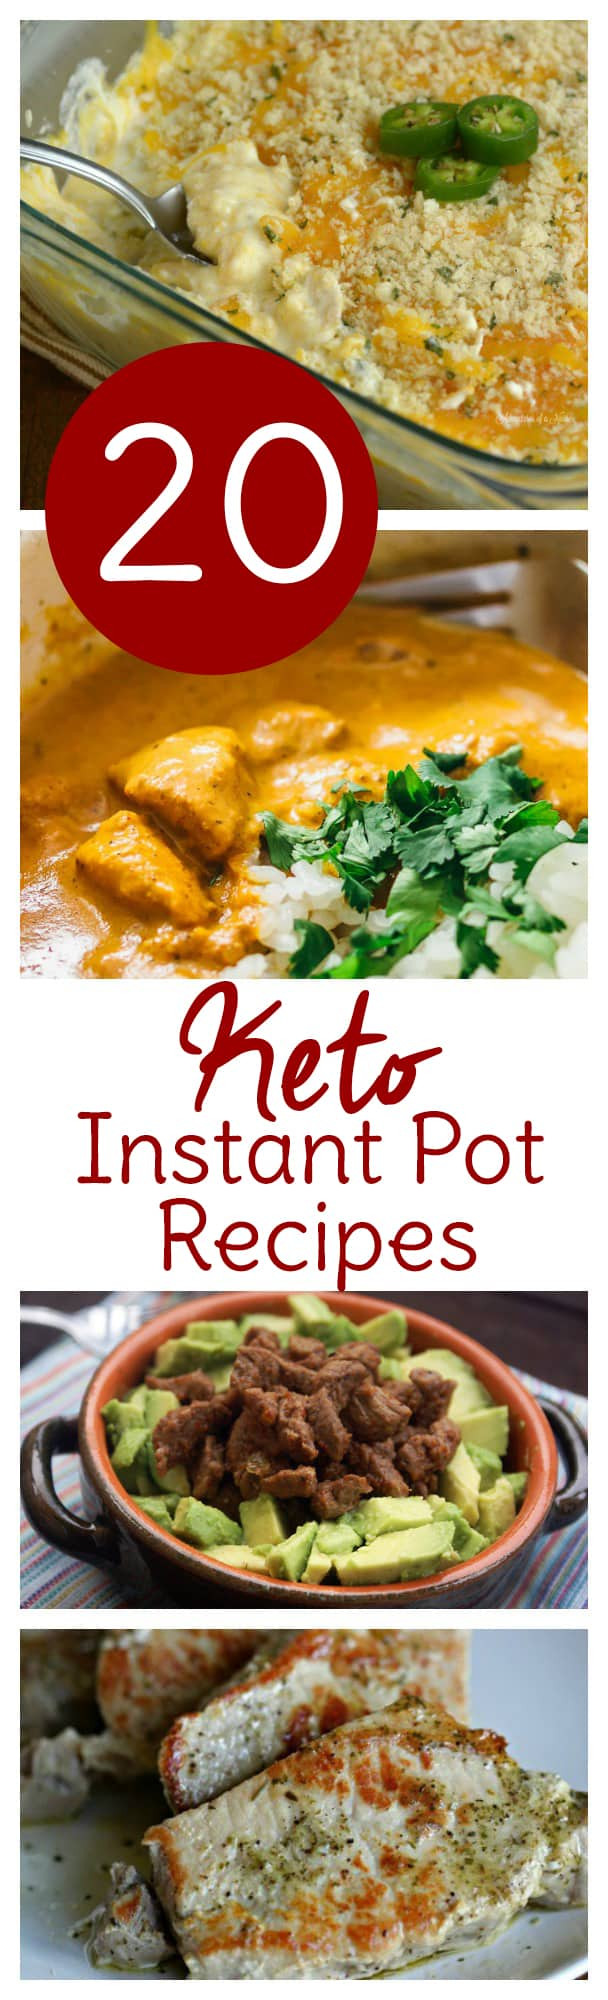 Low Calorie Instant Pot Recipes
 20 Instant Pot Keto Recipes to Make This Week